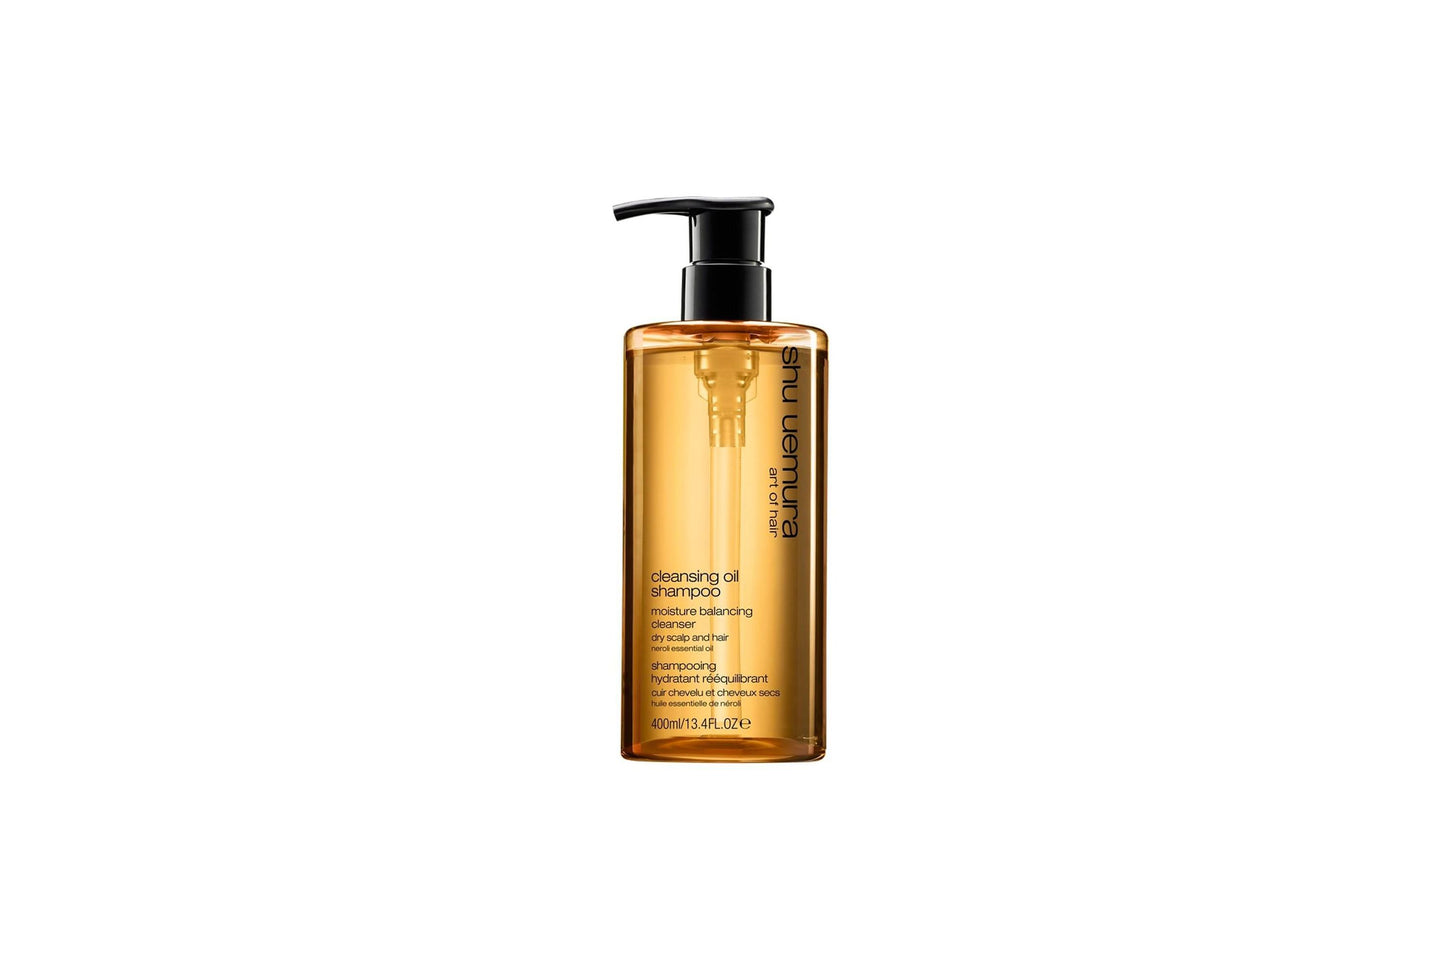 CLEANSING OIL MOISTURE BALANCING CLEANSER